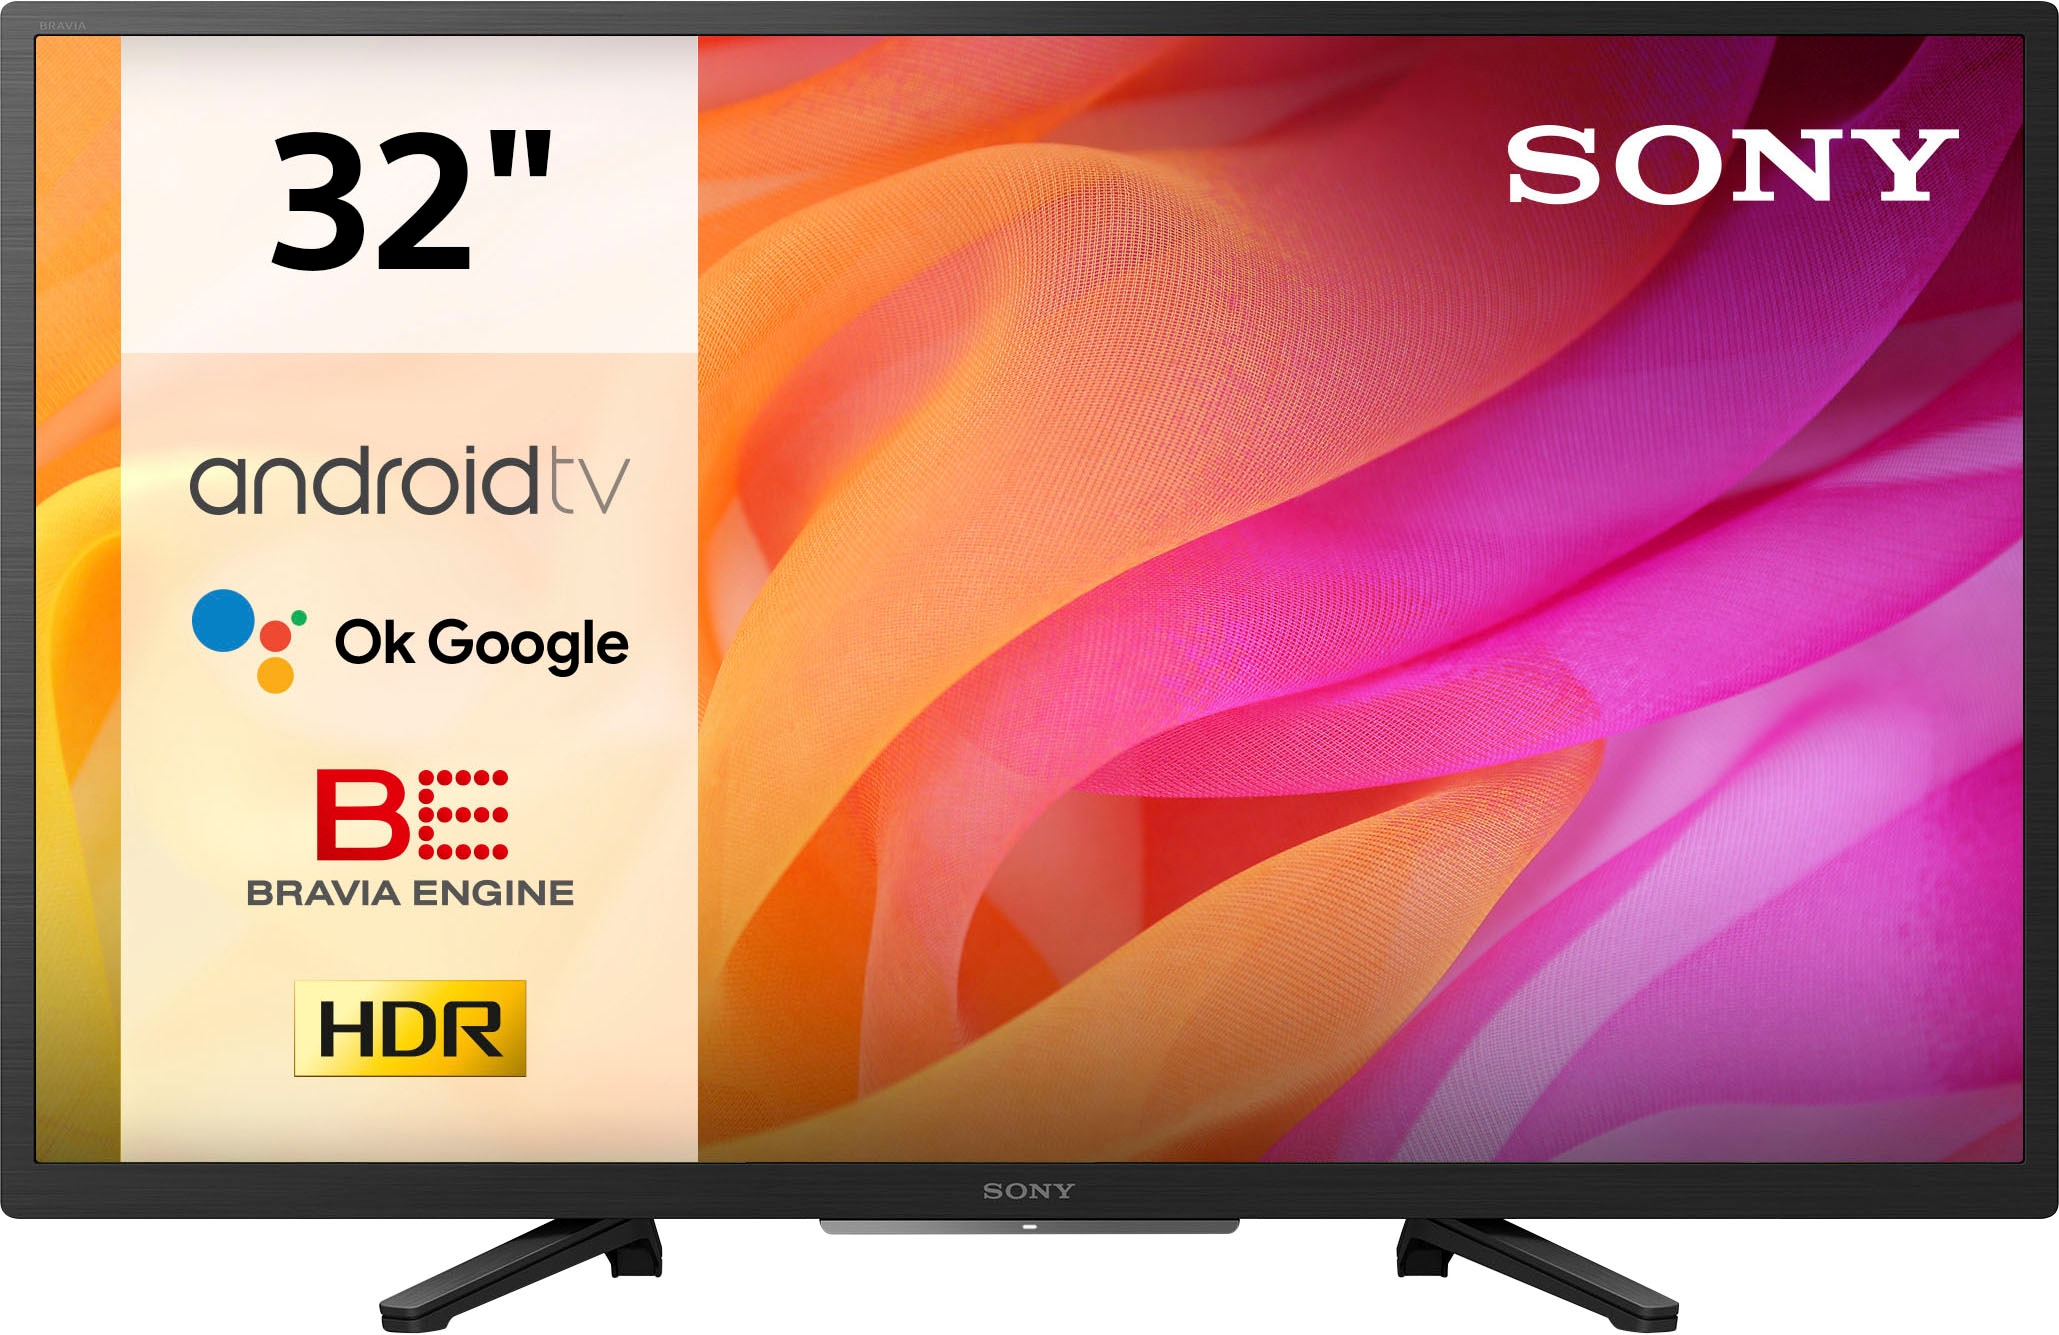 Sony LCD-LED Fernseher »KD-32800W/1«, 80 WXGA, bei Android HD jetzt BRAVIA, TV, Triple Tuner, TV, Zoll, Heady, cm/32 HDR OTTO Smart